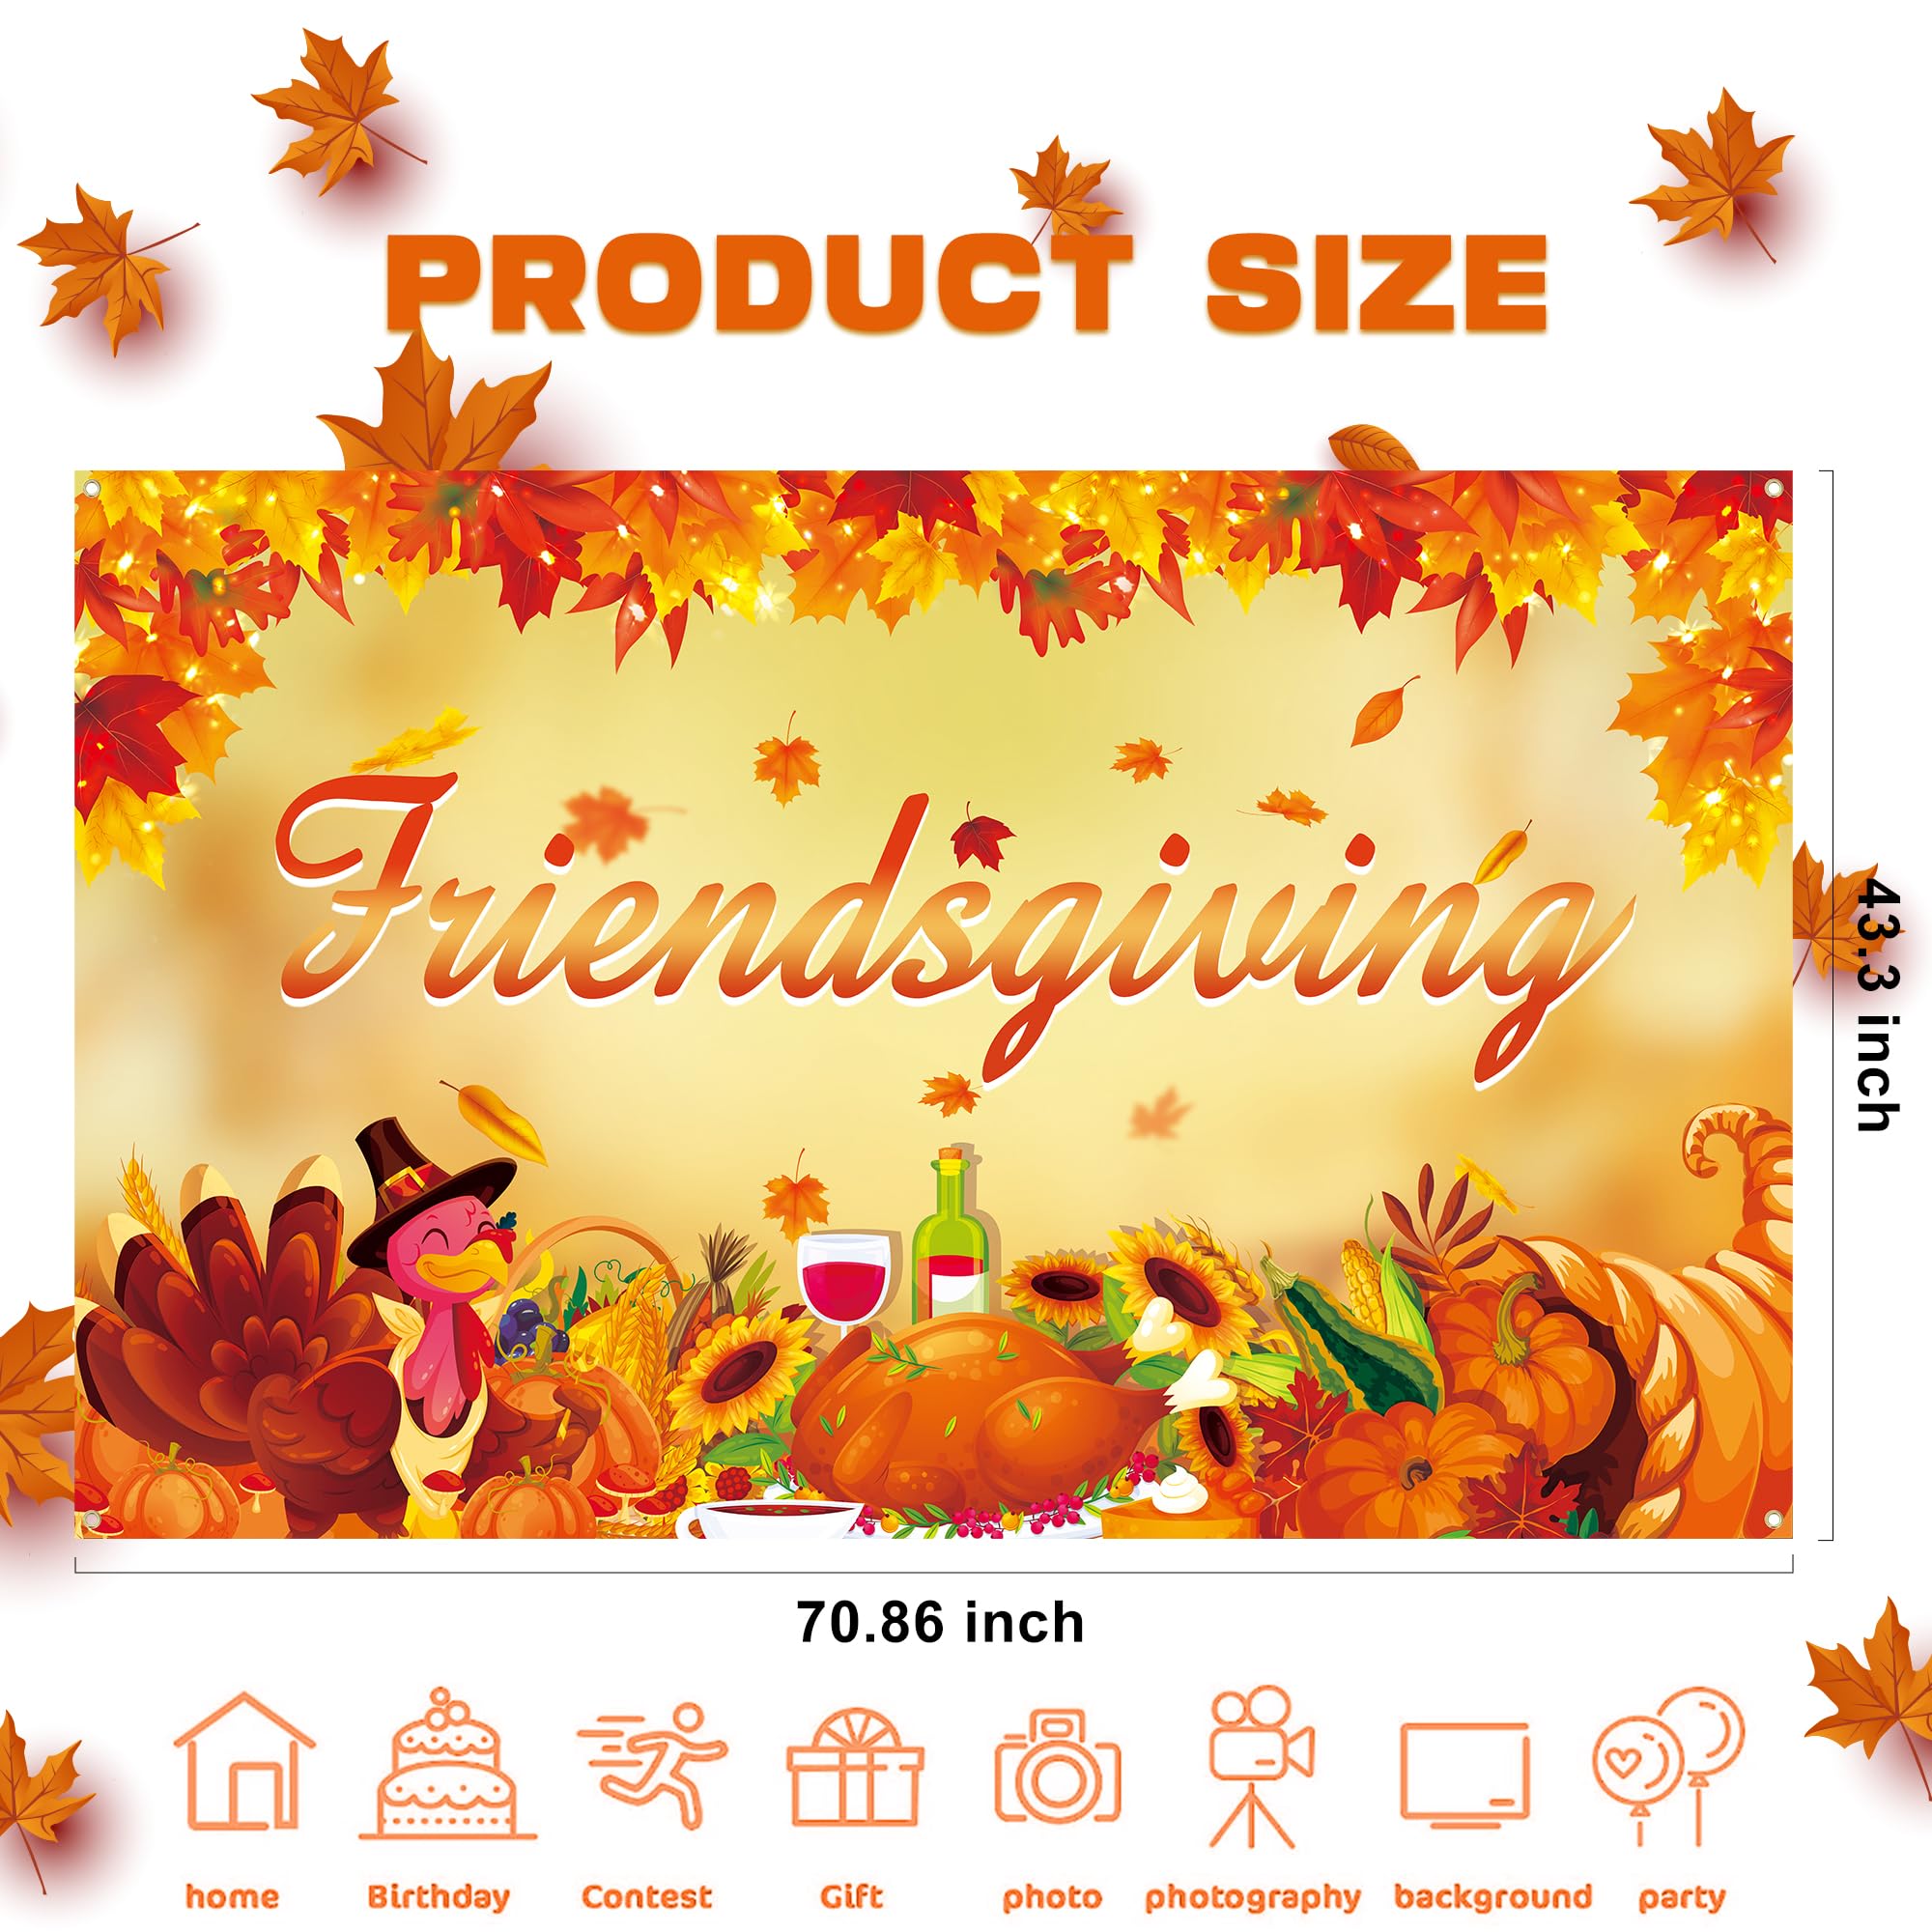 Friendsgiving Backdrop, Friendsgiving Photo Backdrop Happy Friendsgiving Banner, Thanksgiving Backdrops for Photography Party Decorations, 71 x 43 Inch